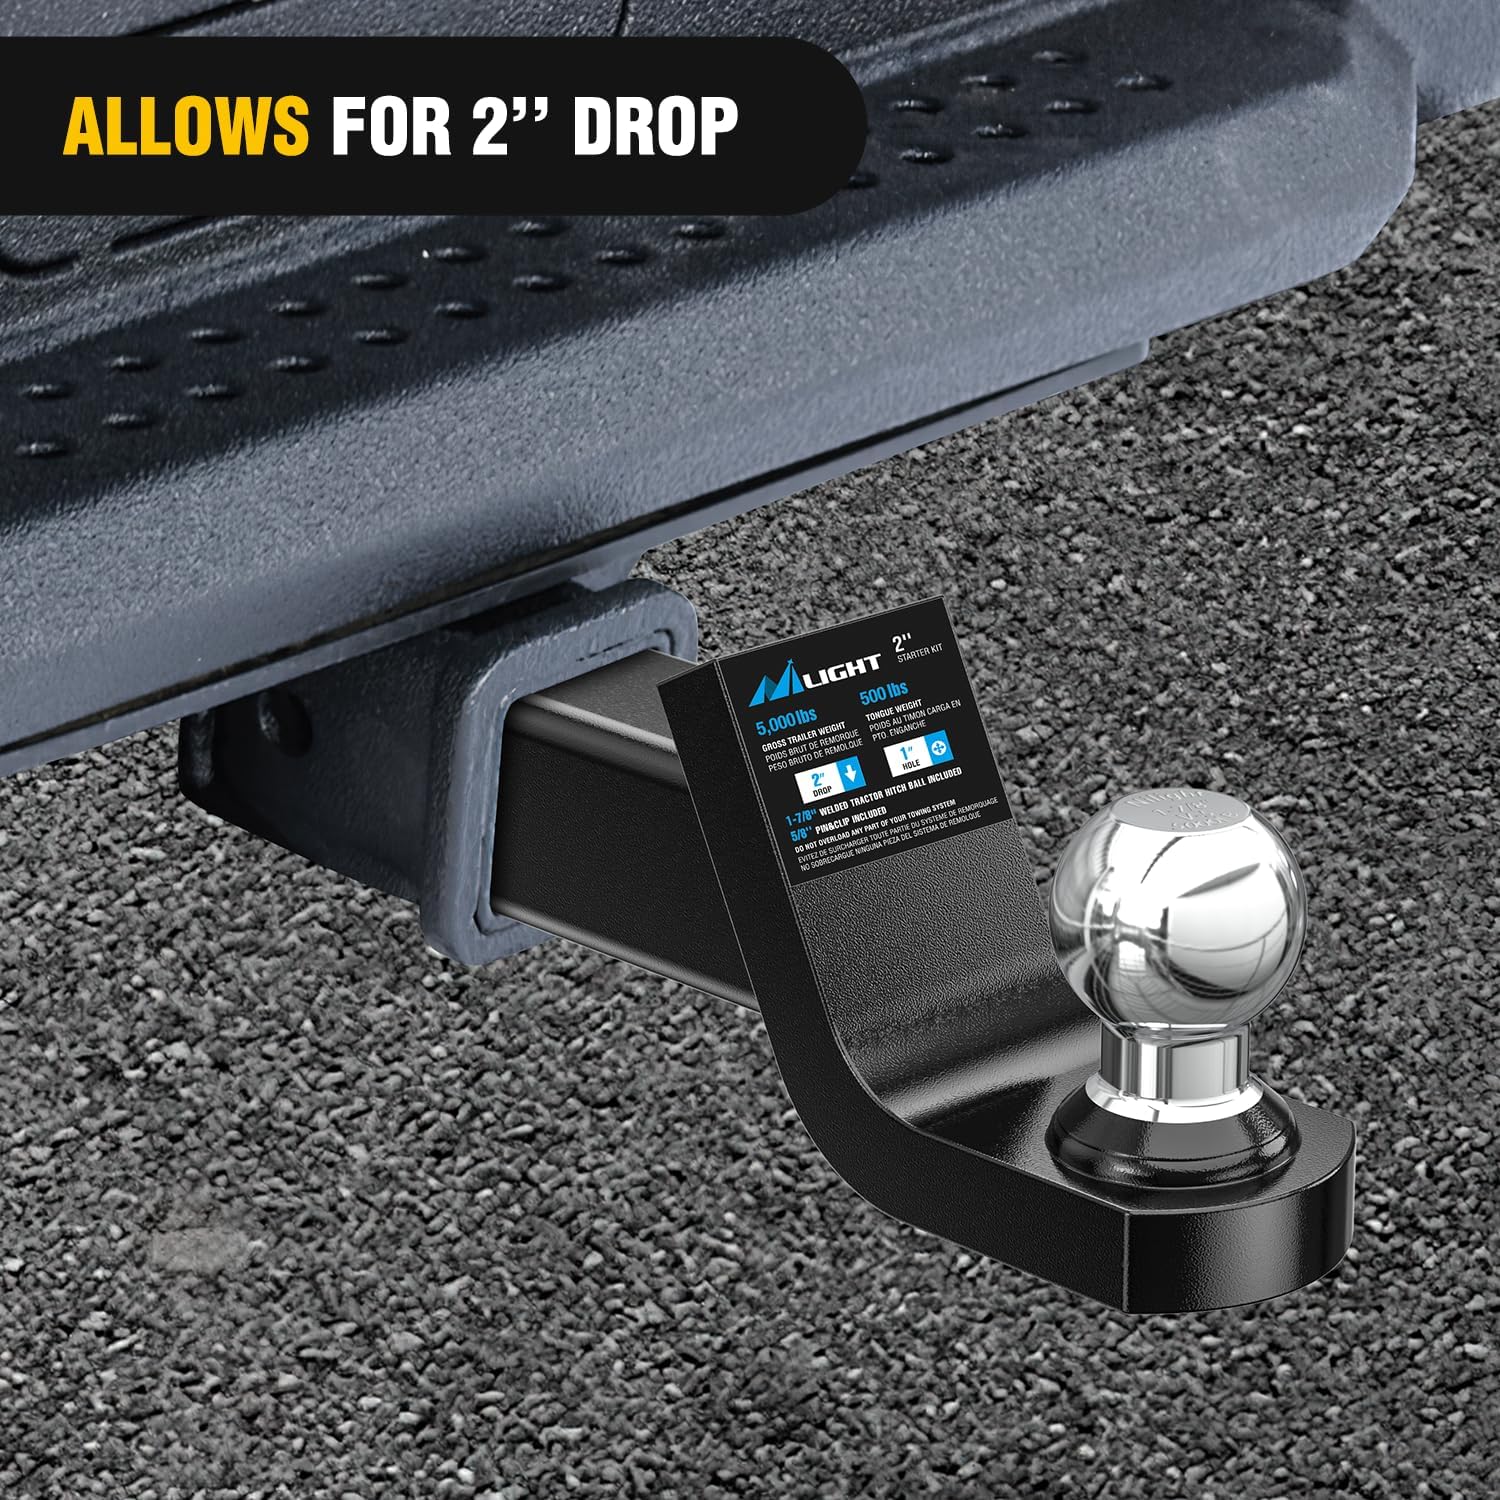 Fusion Trailer Hitch Mount with 1-7/8" Trailer Ball 5/8" Hitch Pin Clip 2" Drop Nilight